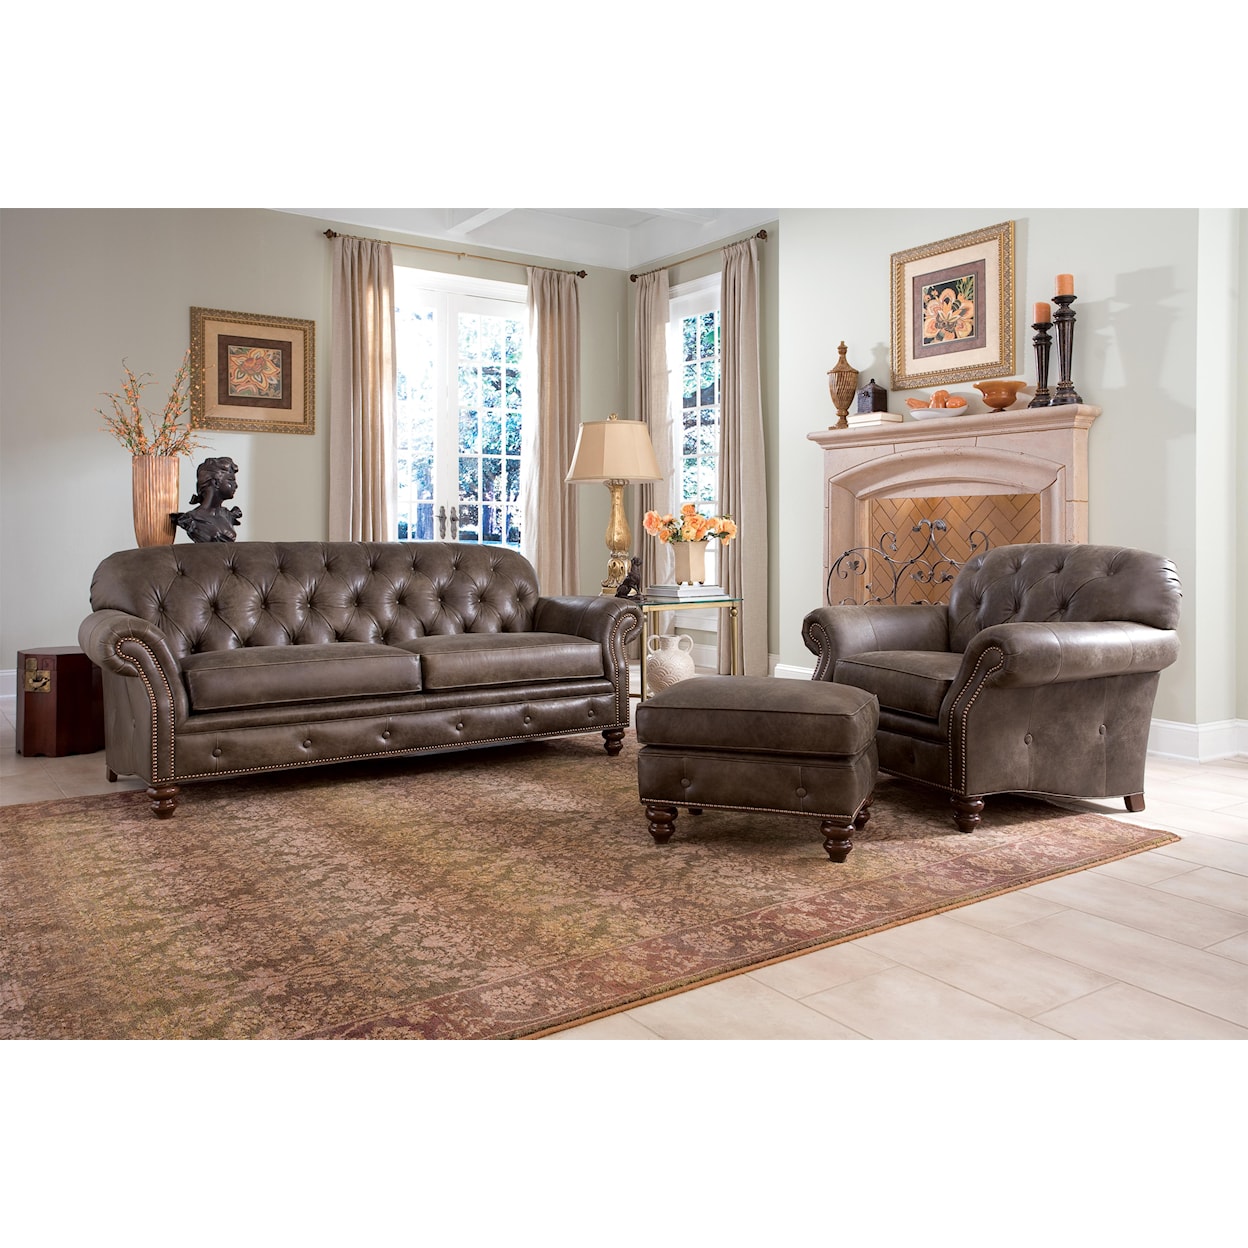 Smith Brothers 396 Stationary Living Room Group